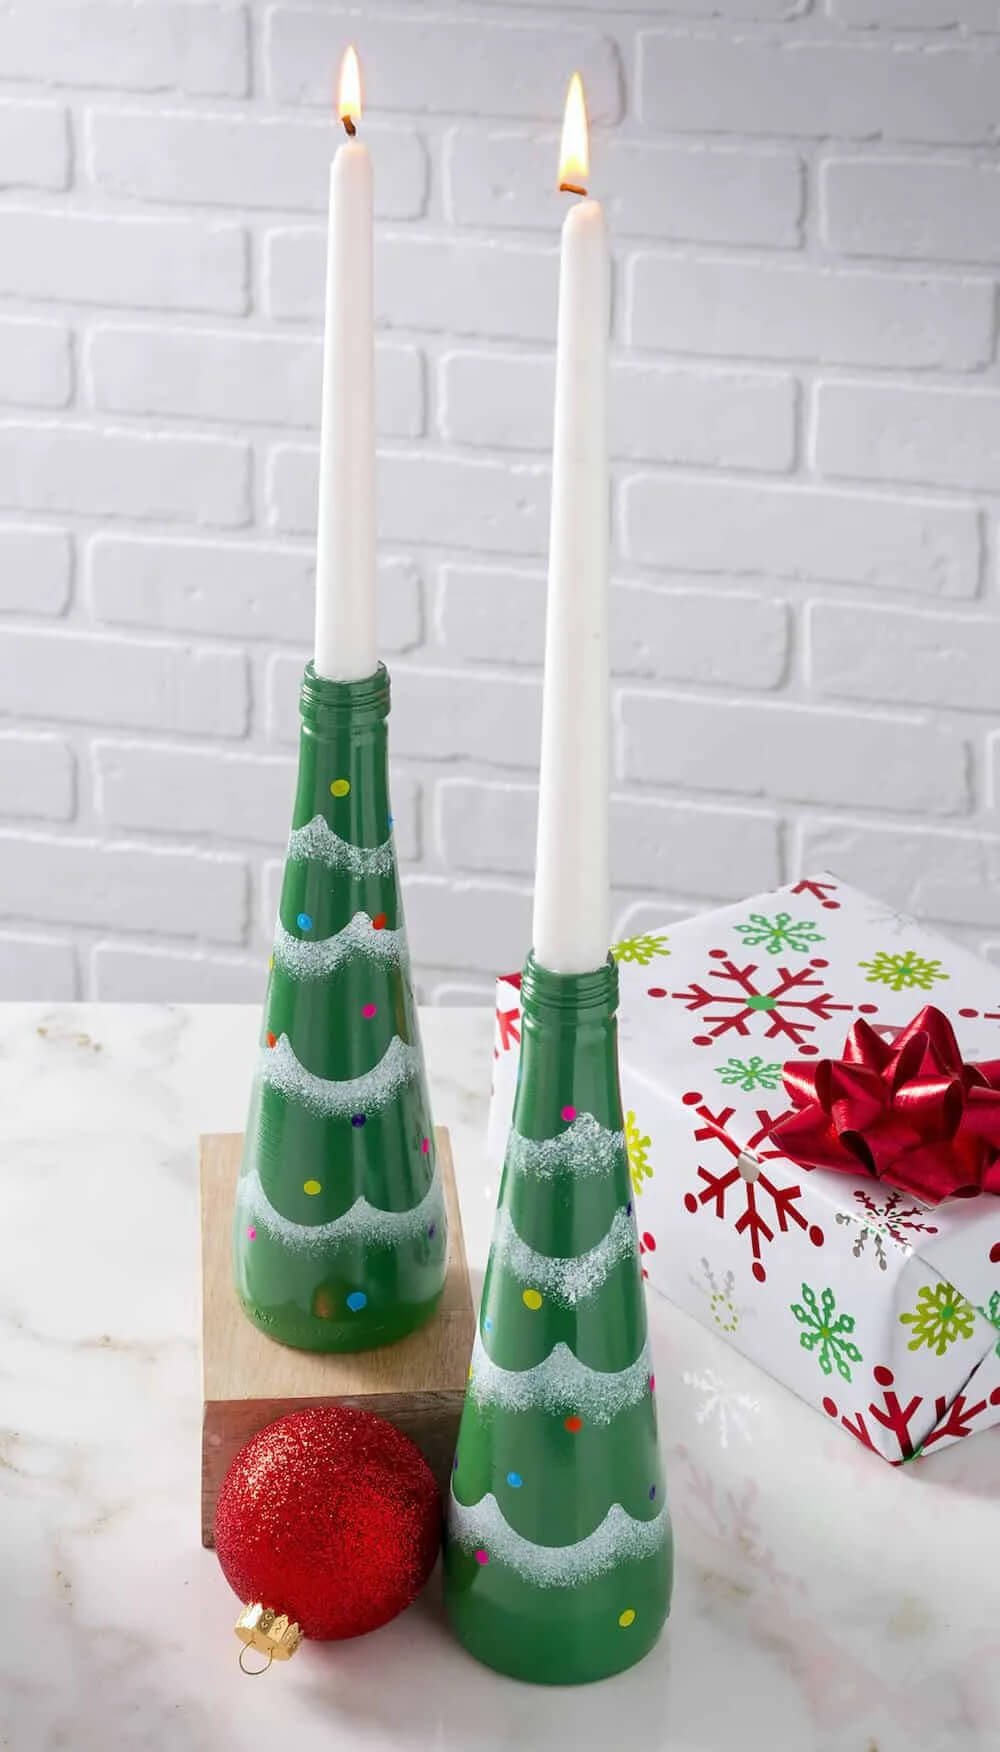 Easy To Make Recycled Bottle Candle Holder Craft  For Christmas Decor Gorgeous DIY Christmas Candles